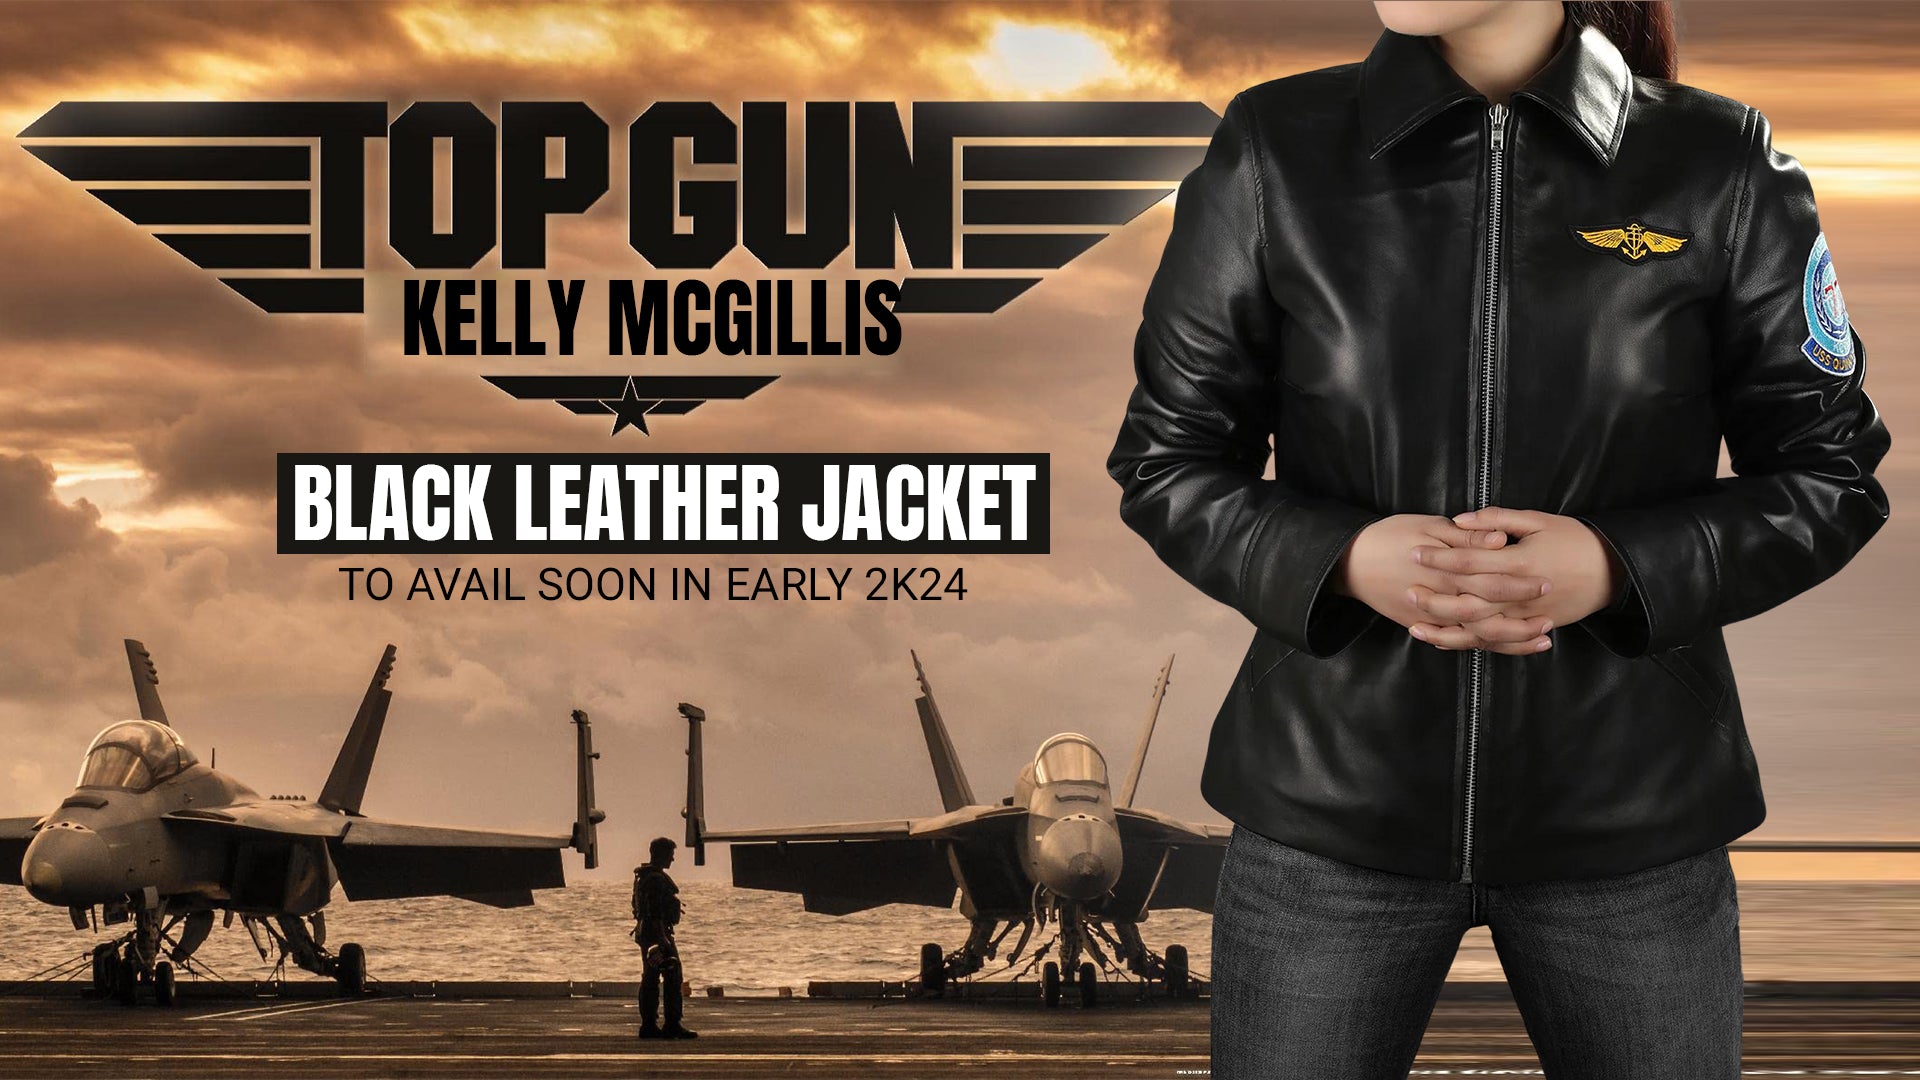 Top Gun Kelly McGillis Black Leather Jacket To Avail Soon In Early 2k24